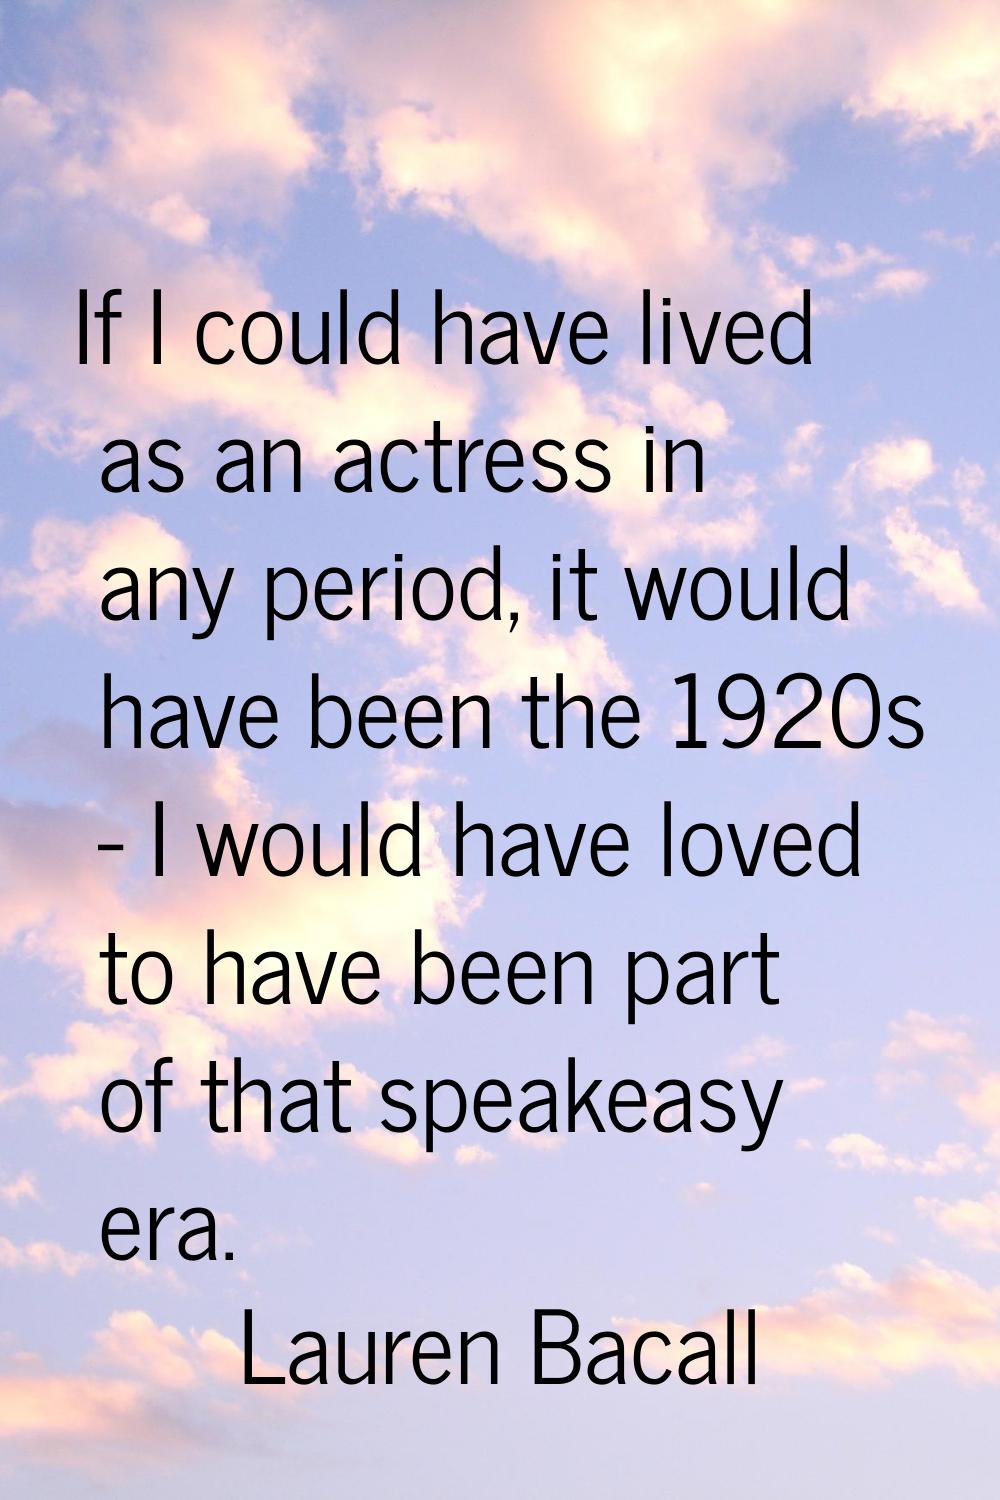 If I could have lived as an actress in any period, it would have been the 1920s - I would have love